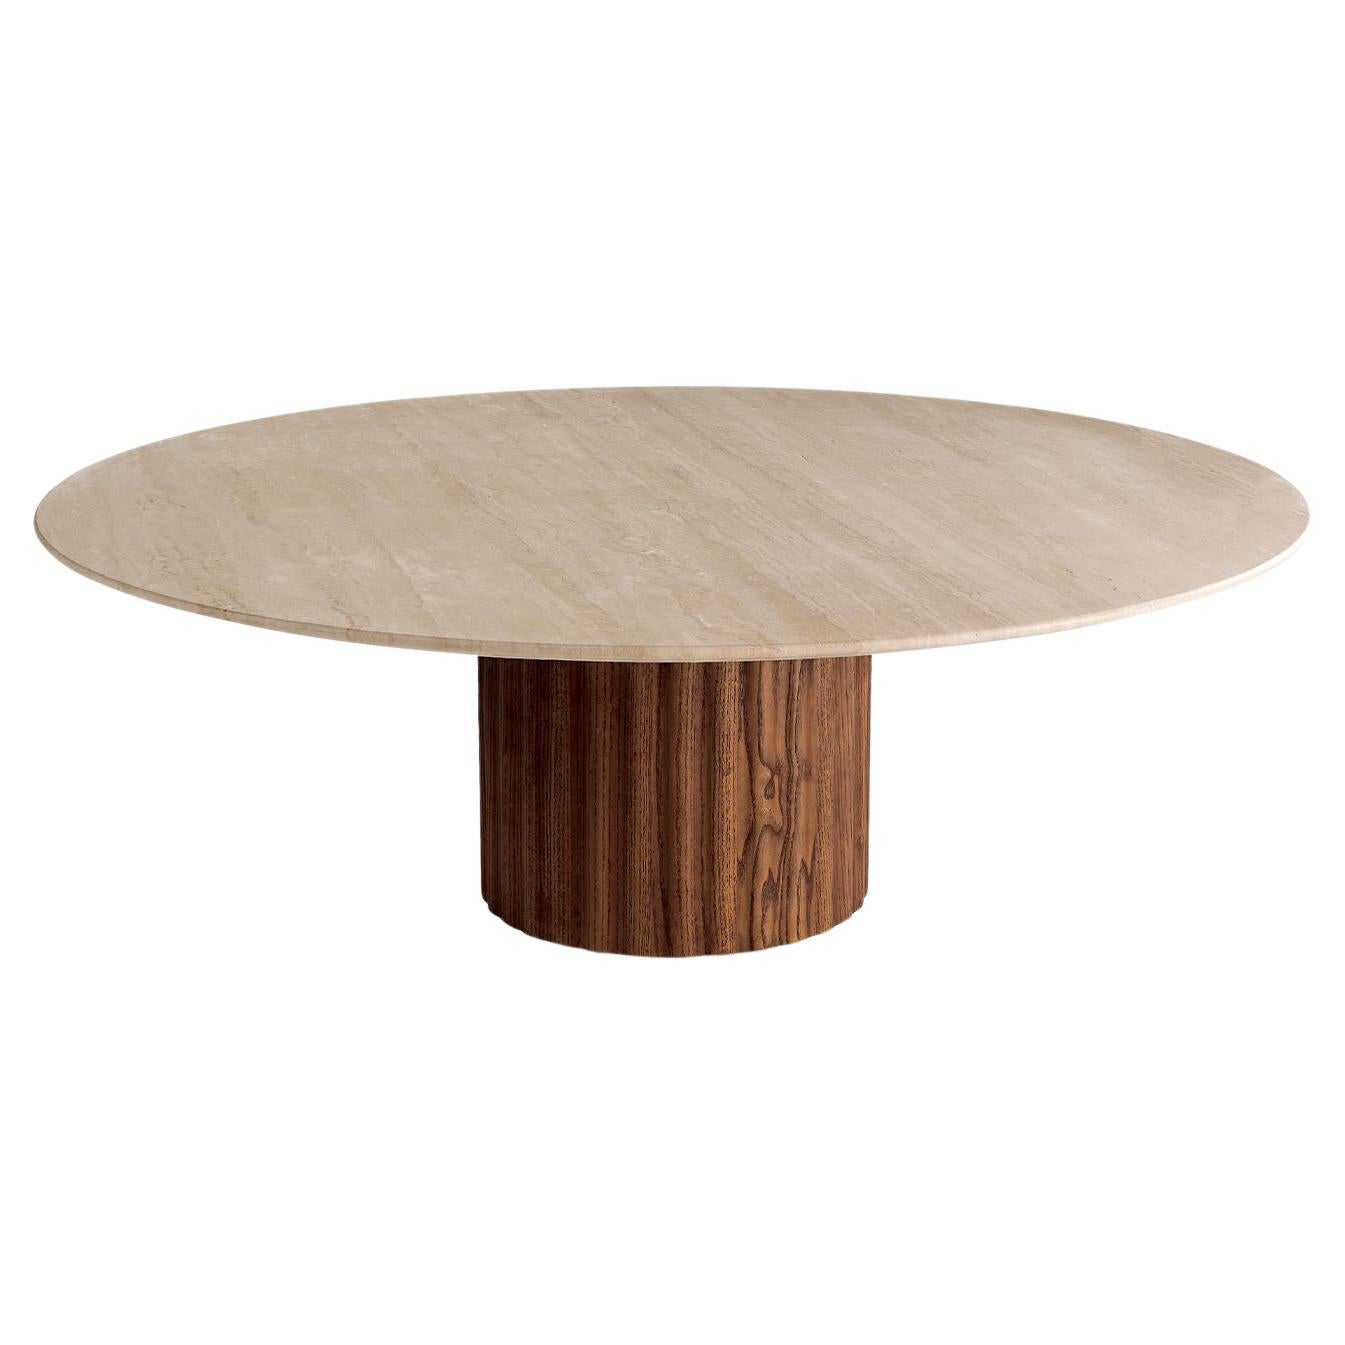 ED/20 216 Babylon Coffee Table For Sale